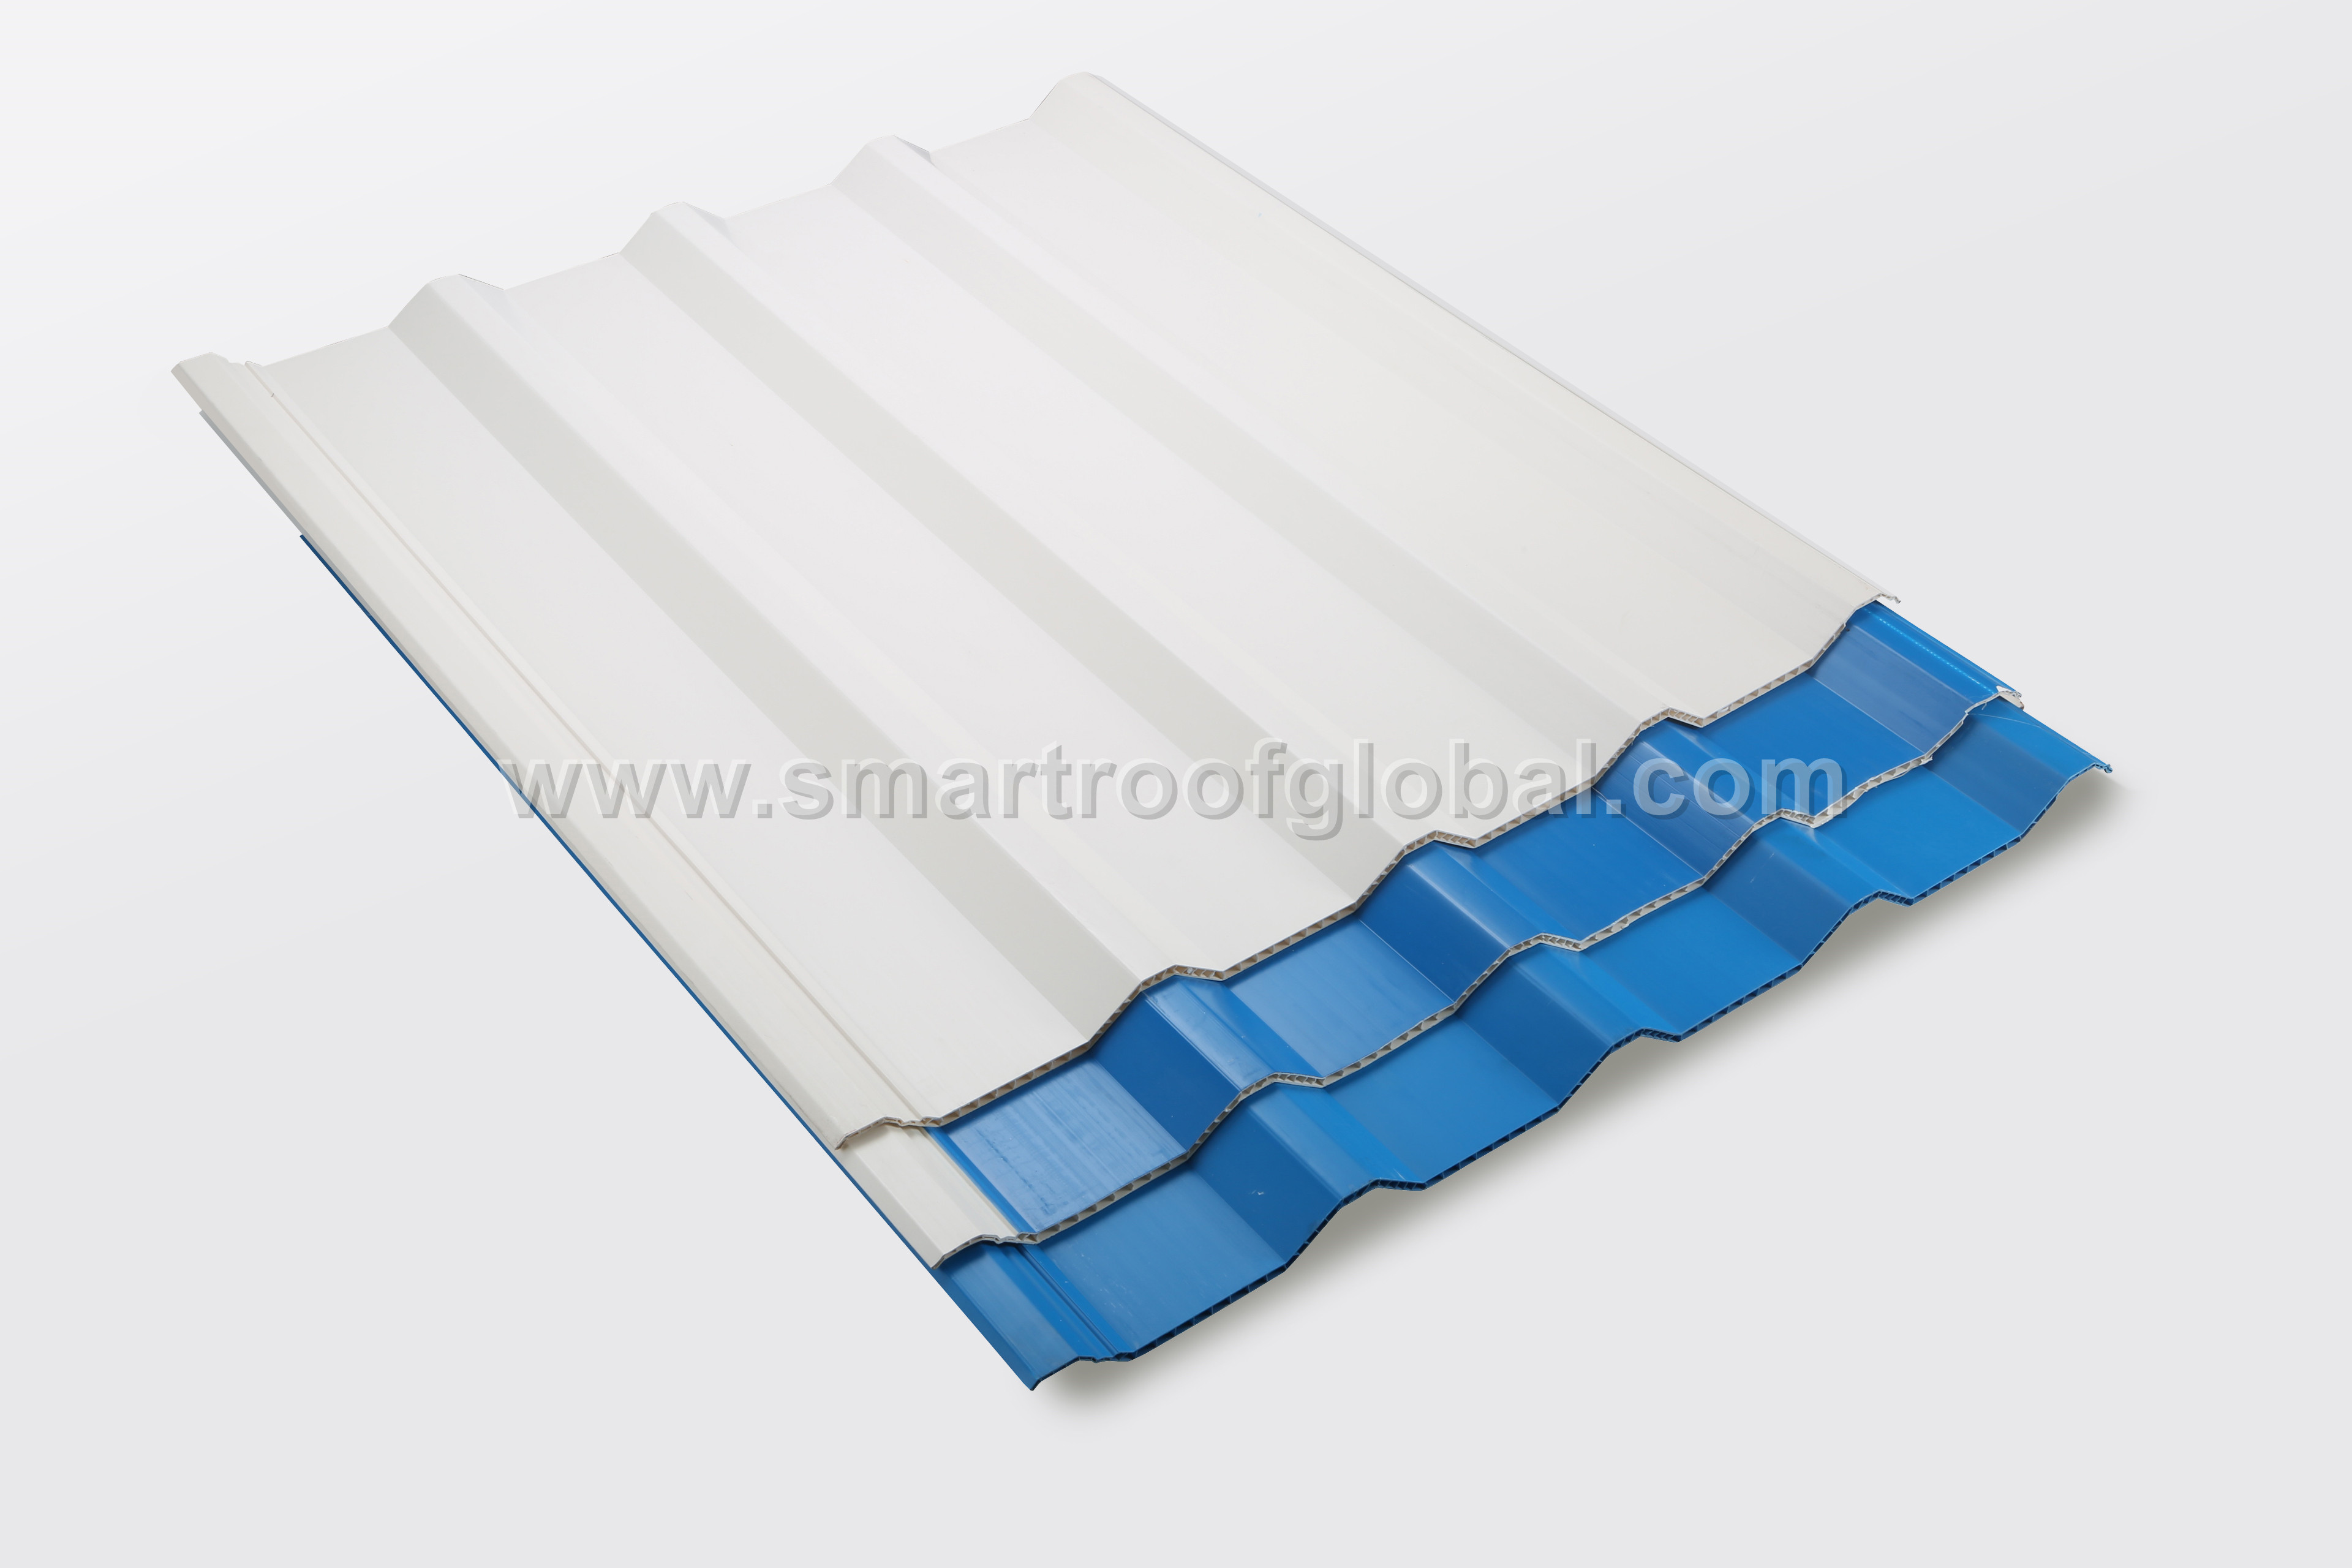 China Oem Plastic Types For Roof, Corrugated Plastic Roofing Sheets Manufacturers In China